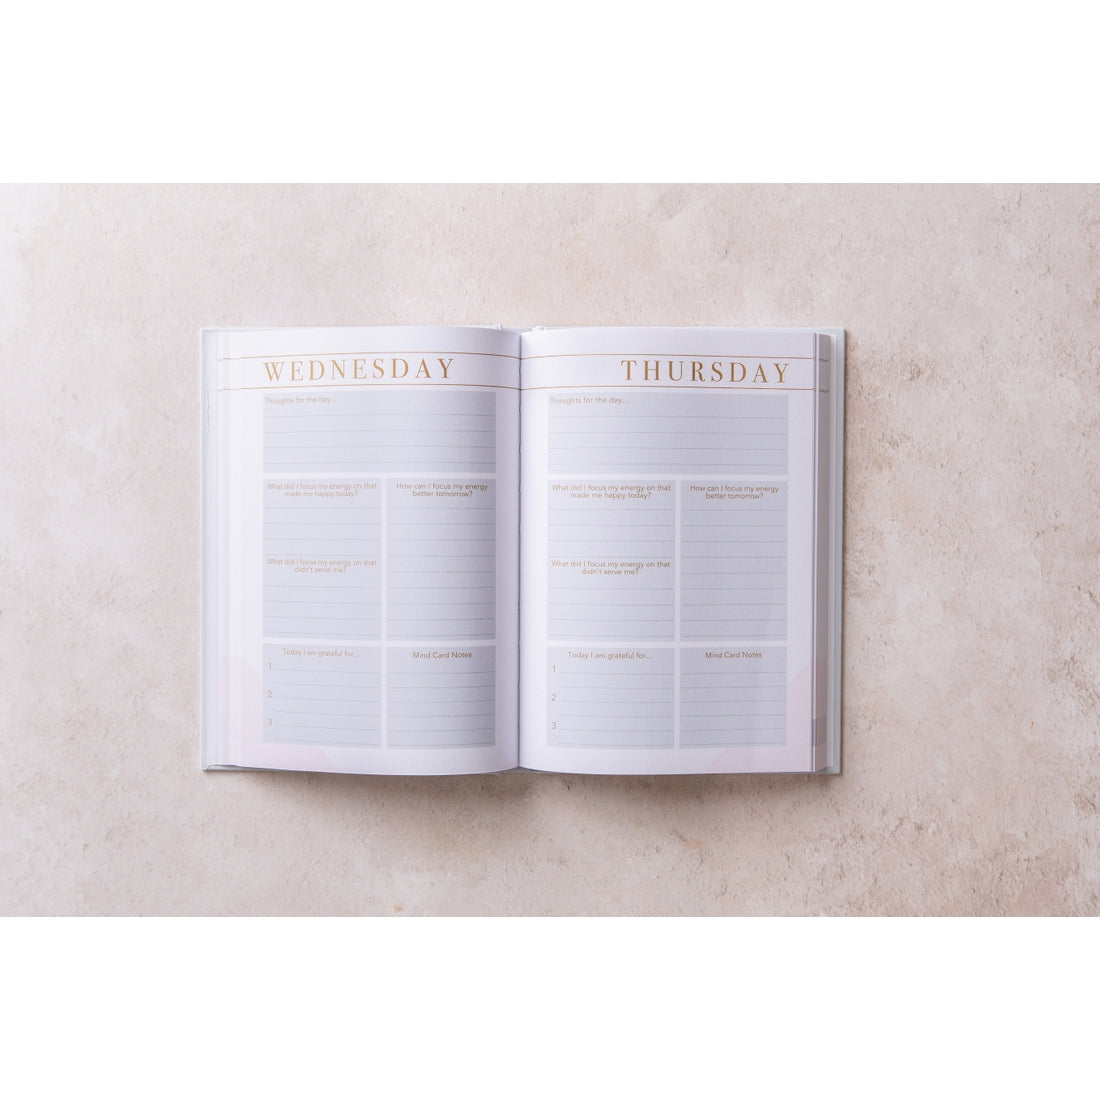 Stationery: Mind Notes 6-Month Daily Wellbeing Journal by LSW